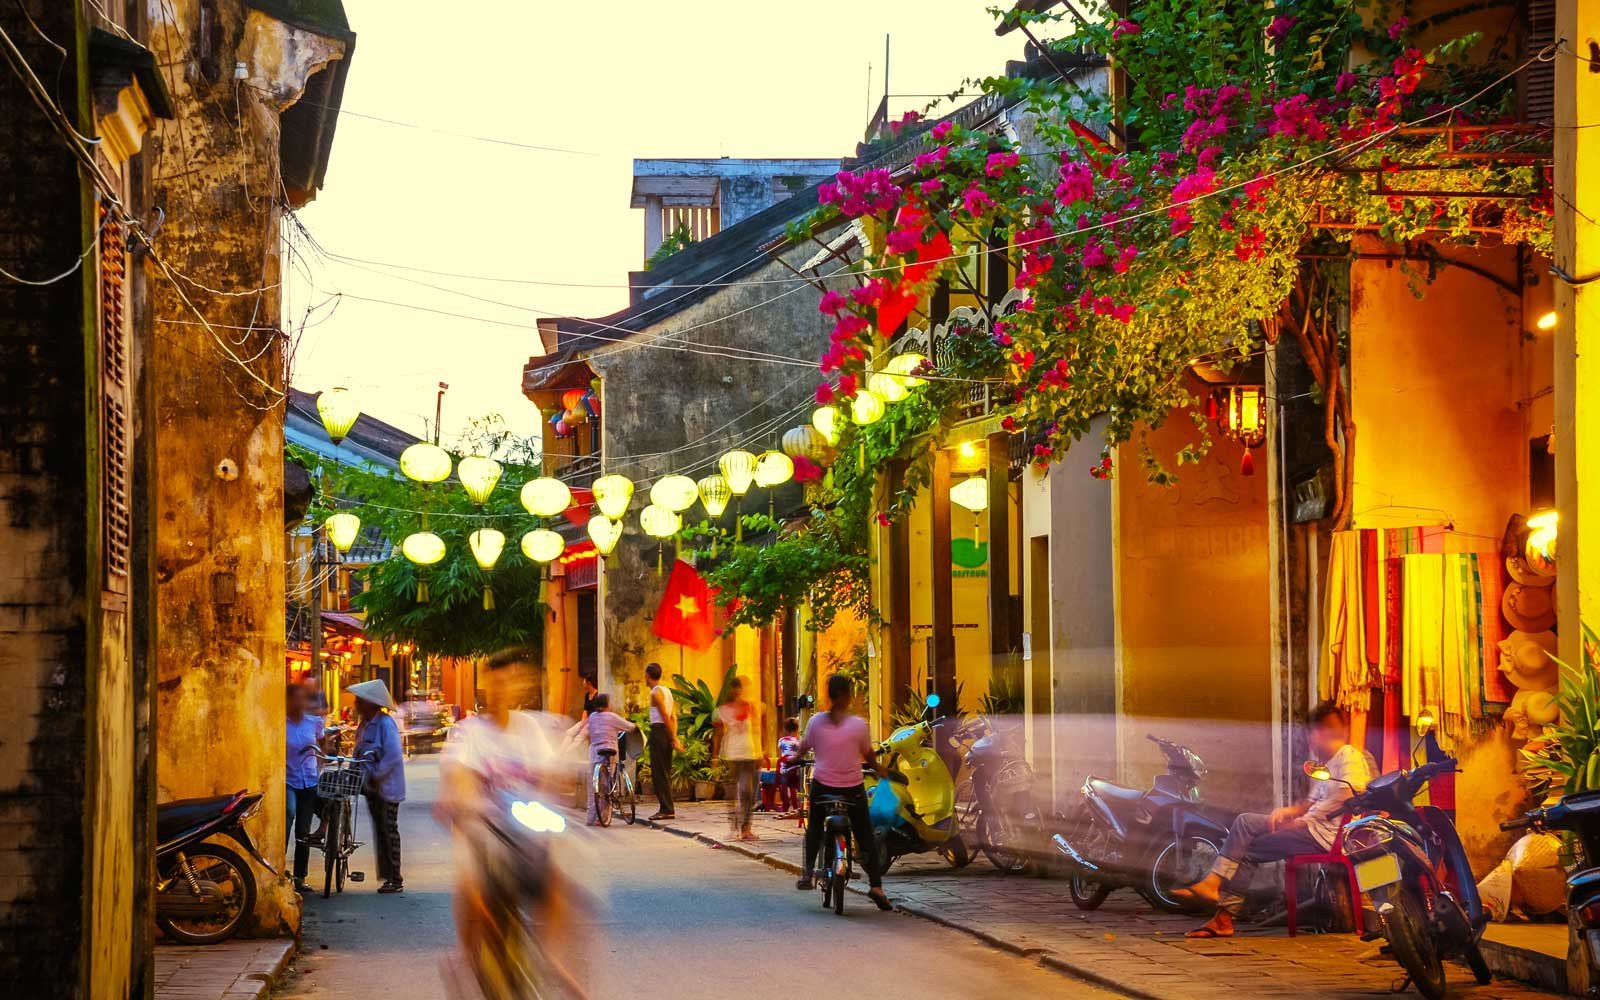 Vietnam named among top destinations for solo travel